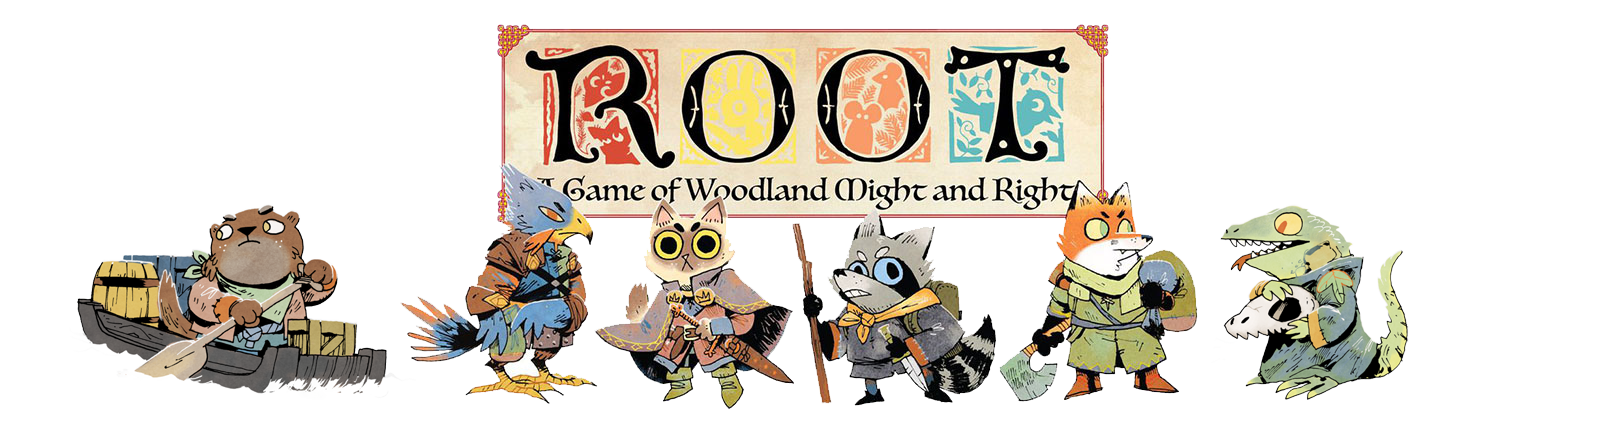 Root, a woodland game of might and right!